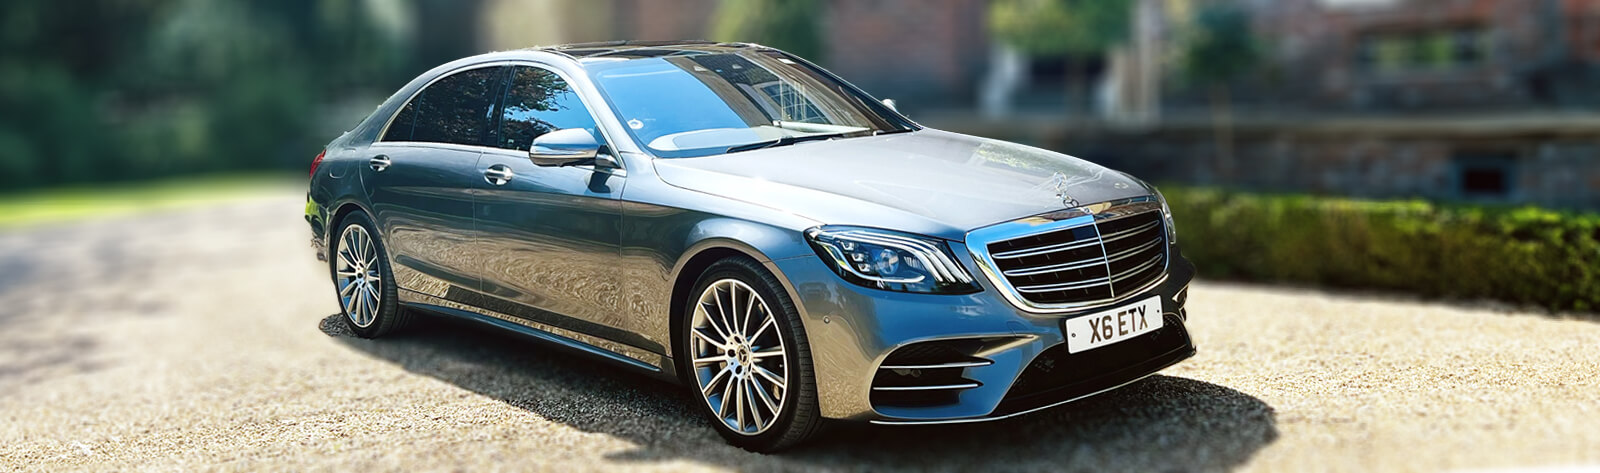 mercedes v class and mercedes s class Greenfield